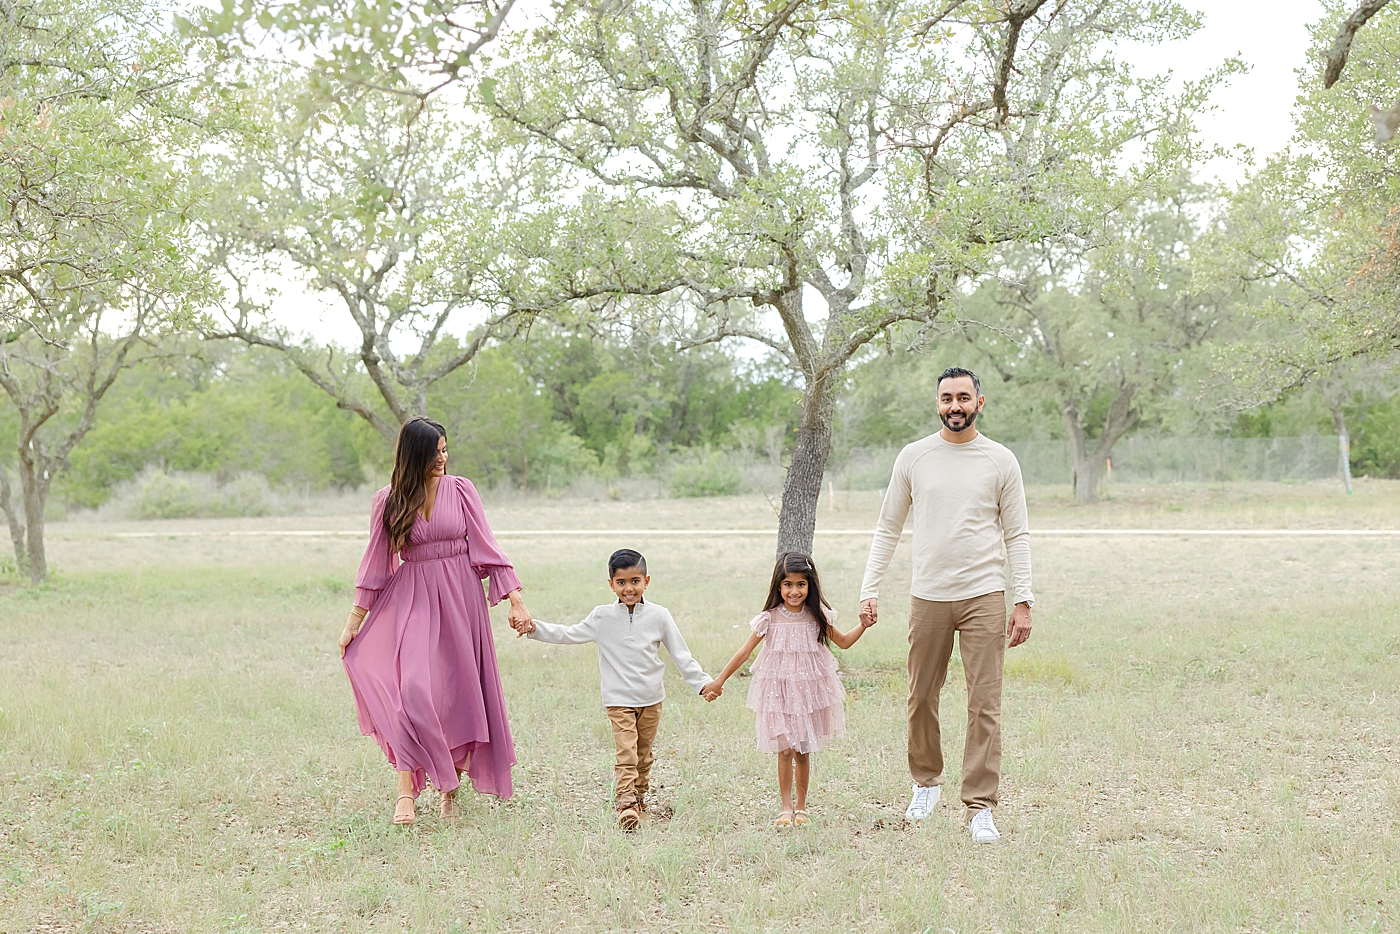 Family of four playing in a field | Image by Sana Ahmed Photography